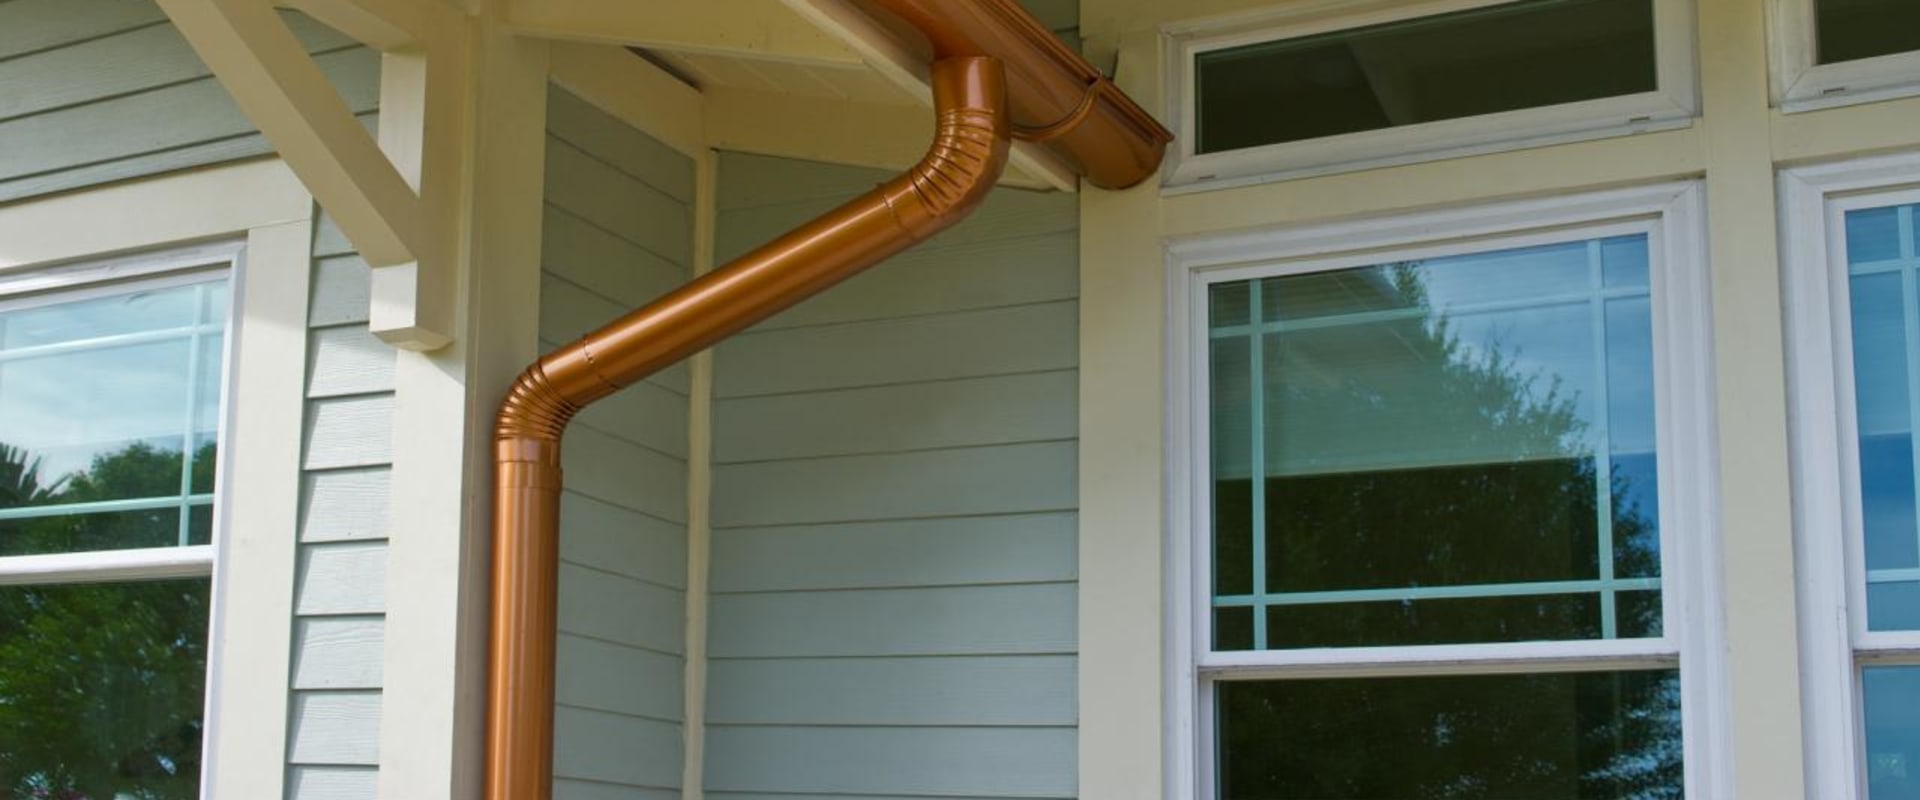 Are Rain Gutters a Smart Investment for Homeowners?